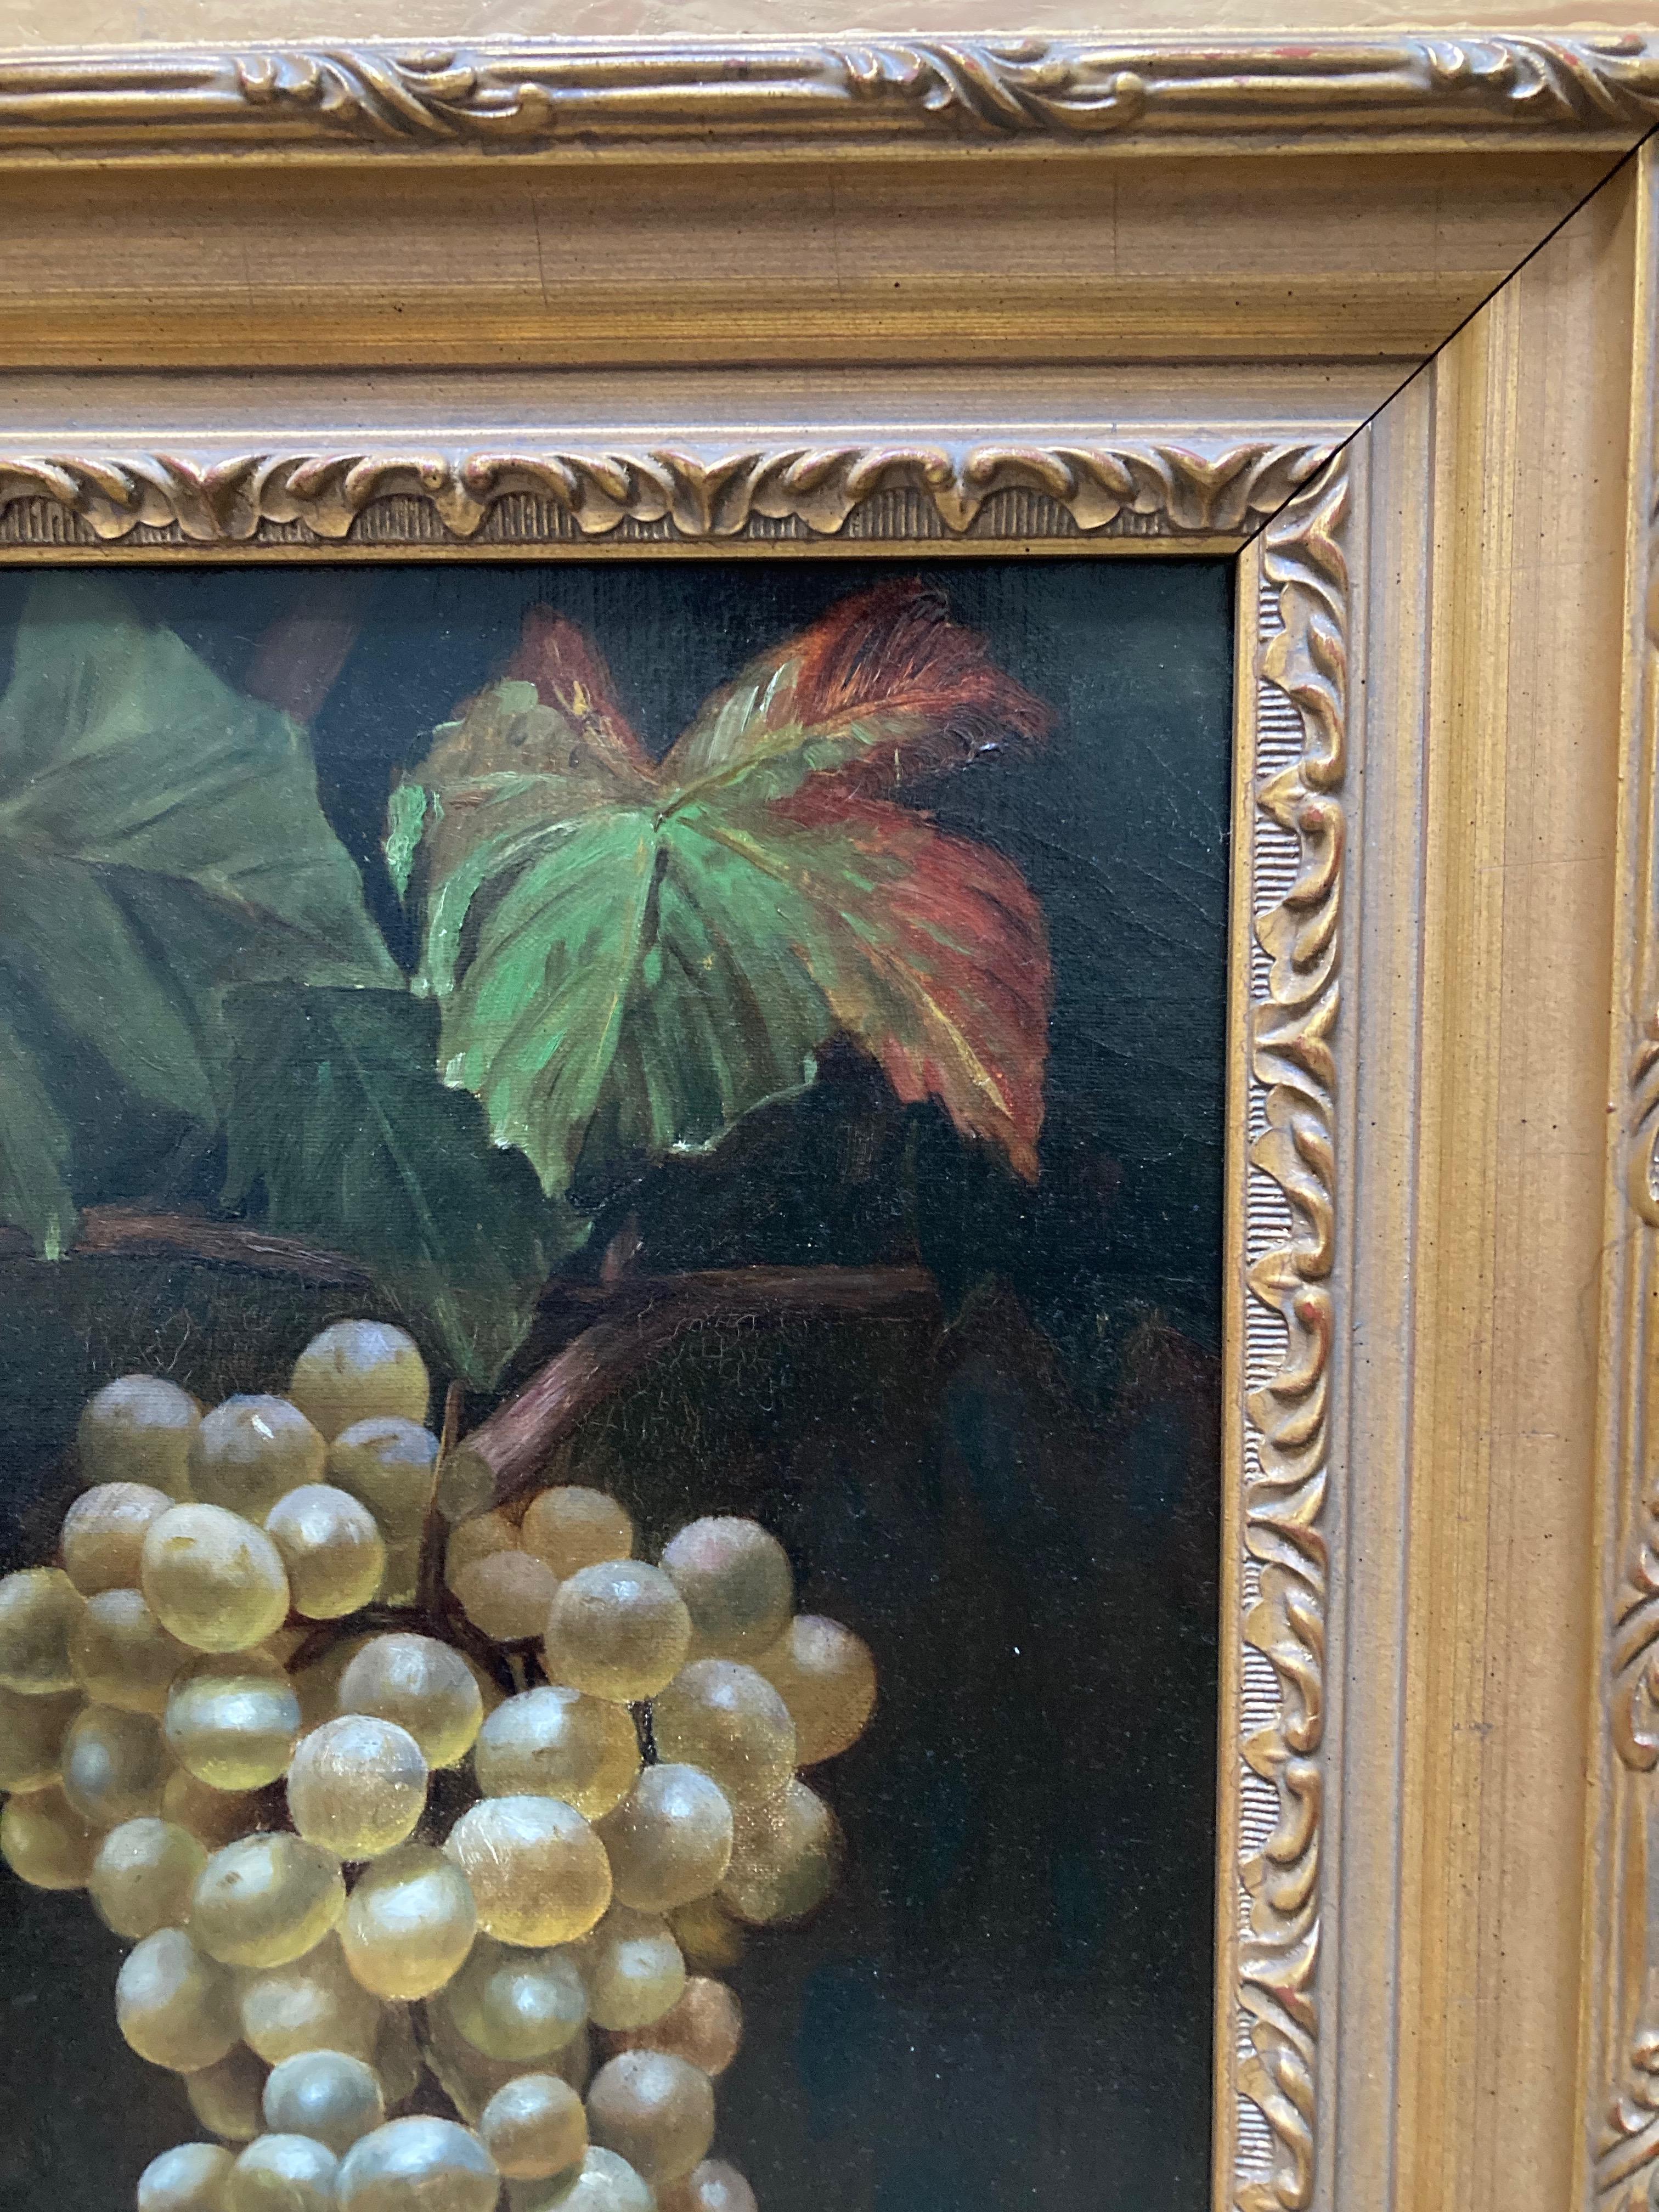 A beautifully painted study of grapes by a very competent hand; superb detailing of the light captured on the succulent fruit. This would look very at home in a dining room or study setting.

Circle of William Michael Harnet (1848-1892)
A study of